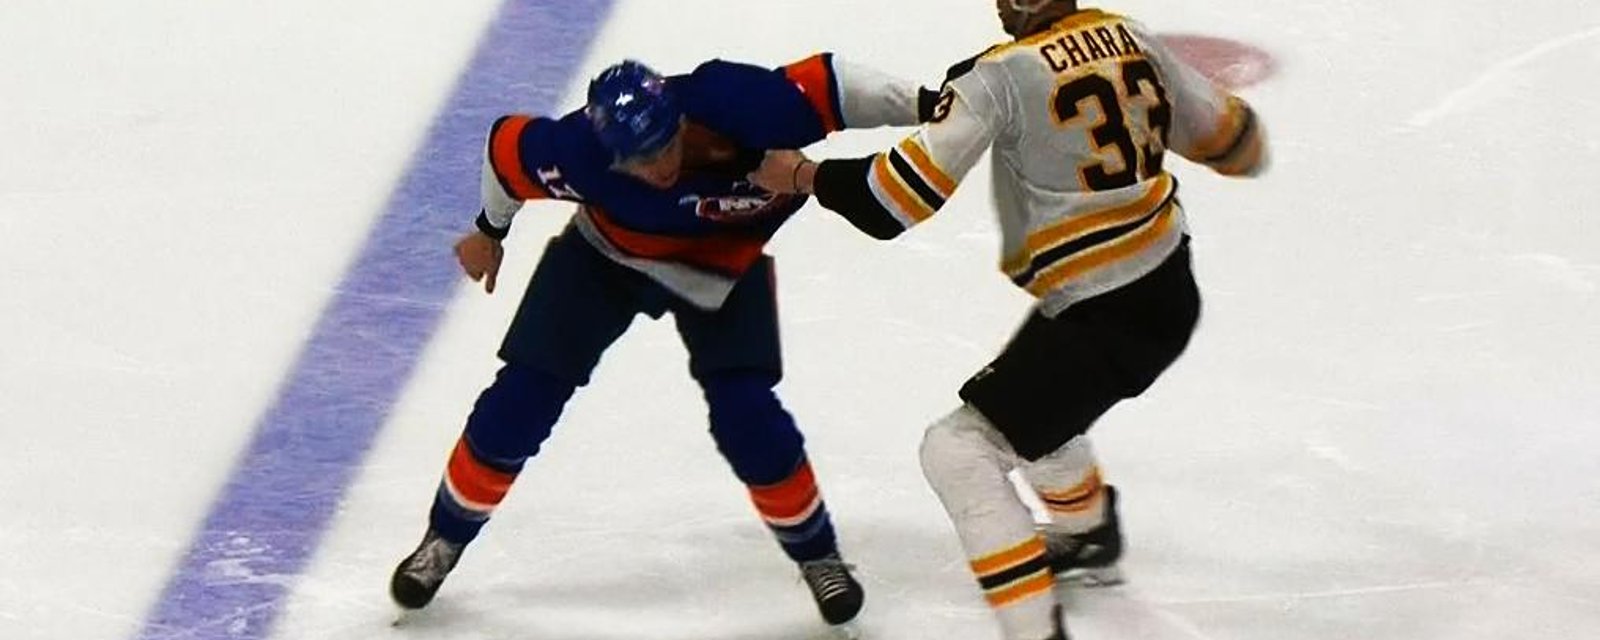 Chara pounds Martin in heavyweight fight that ends with surprising twist! 